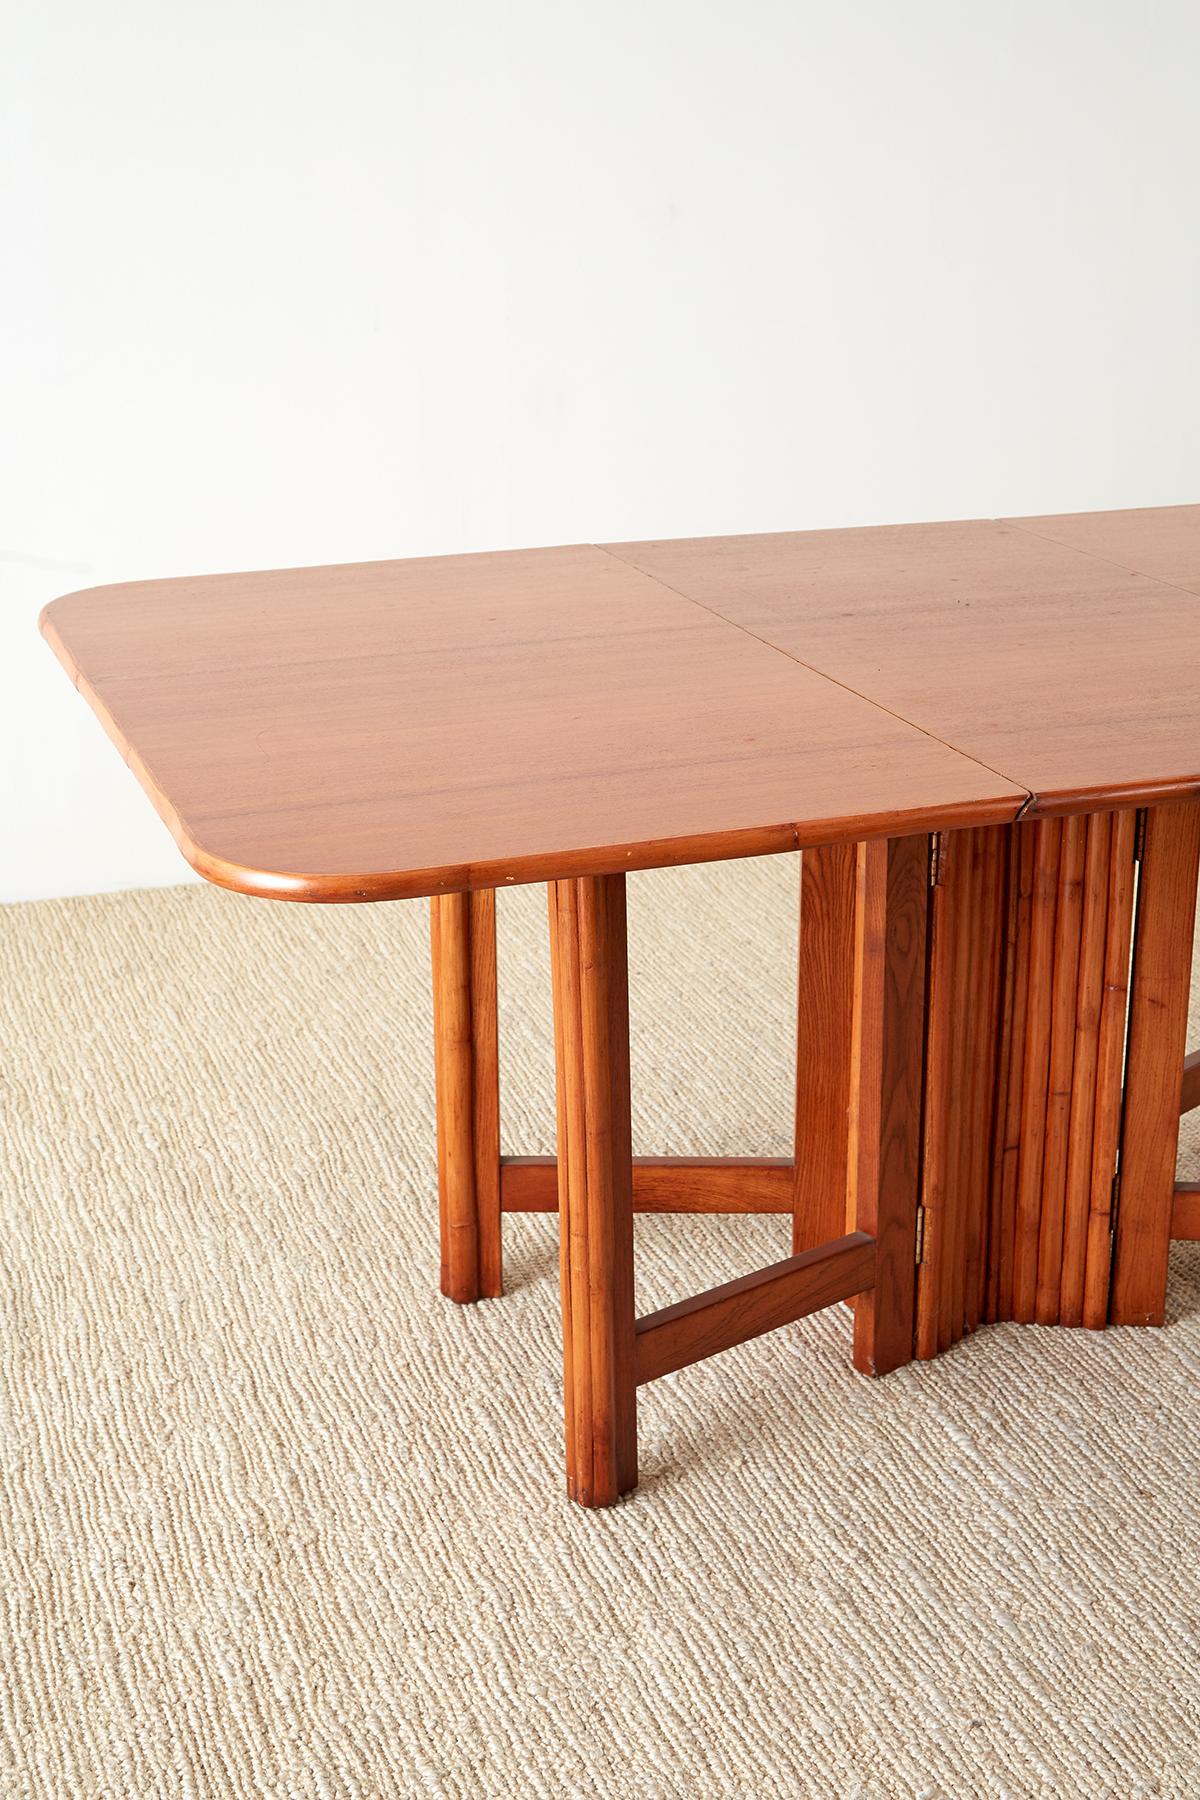 Hand-Crafted Midcentury Drop-Leaf Dining Table with Rattan Base For Sale